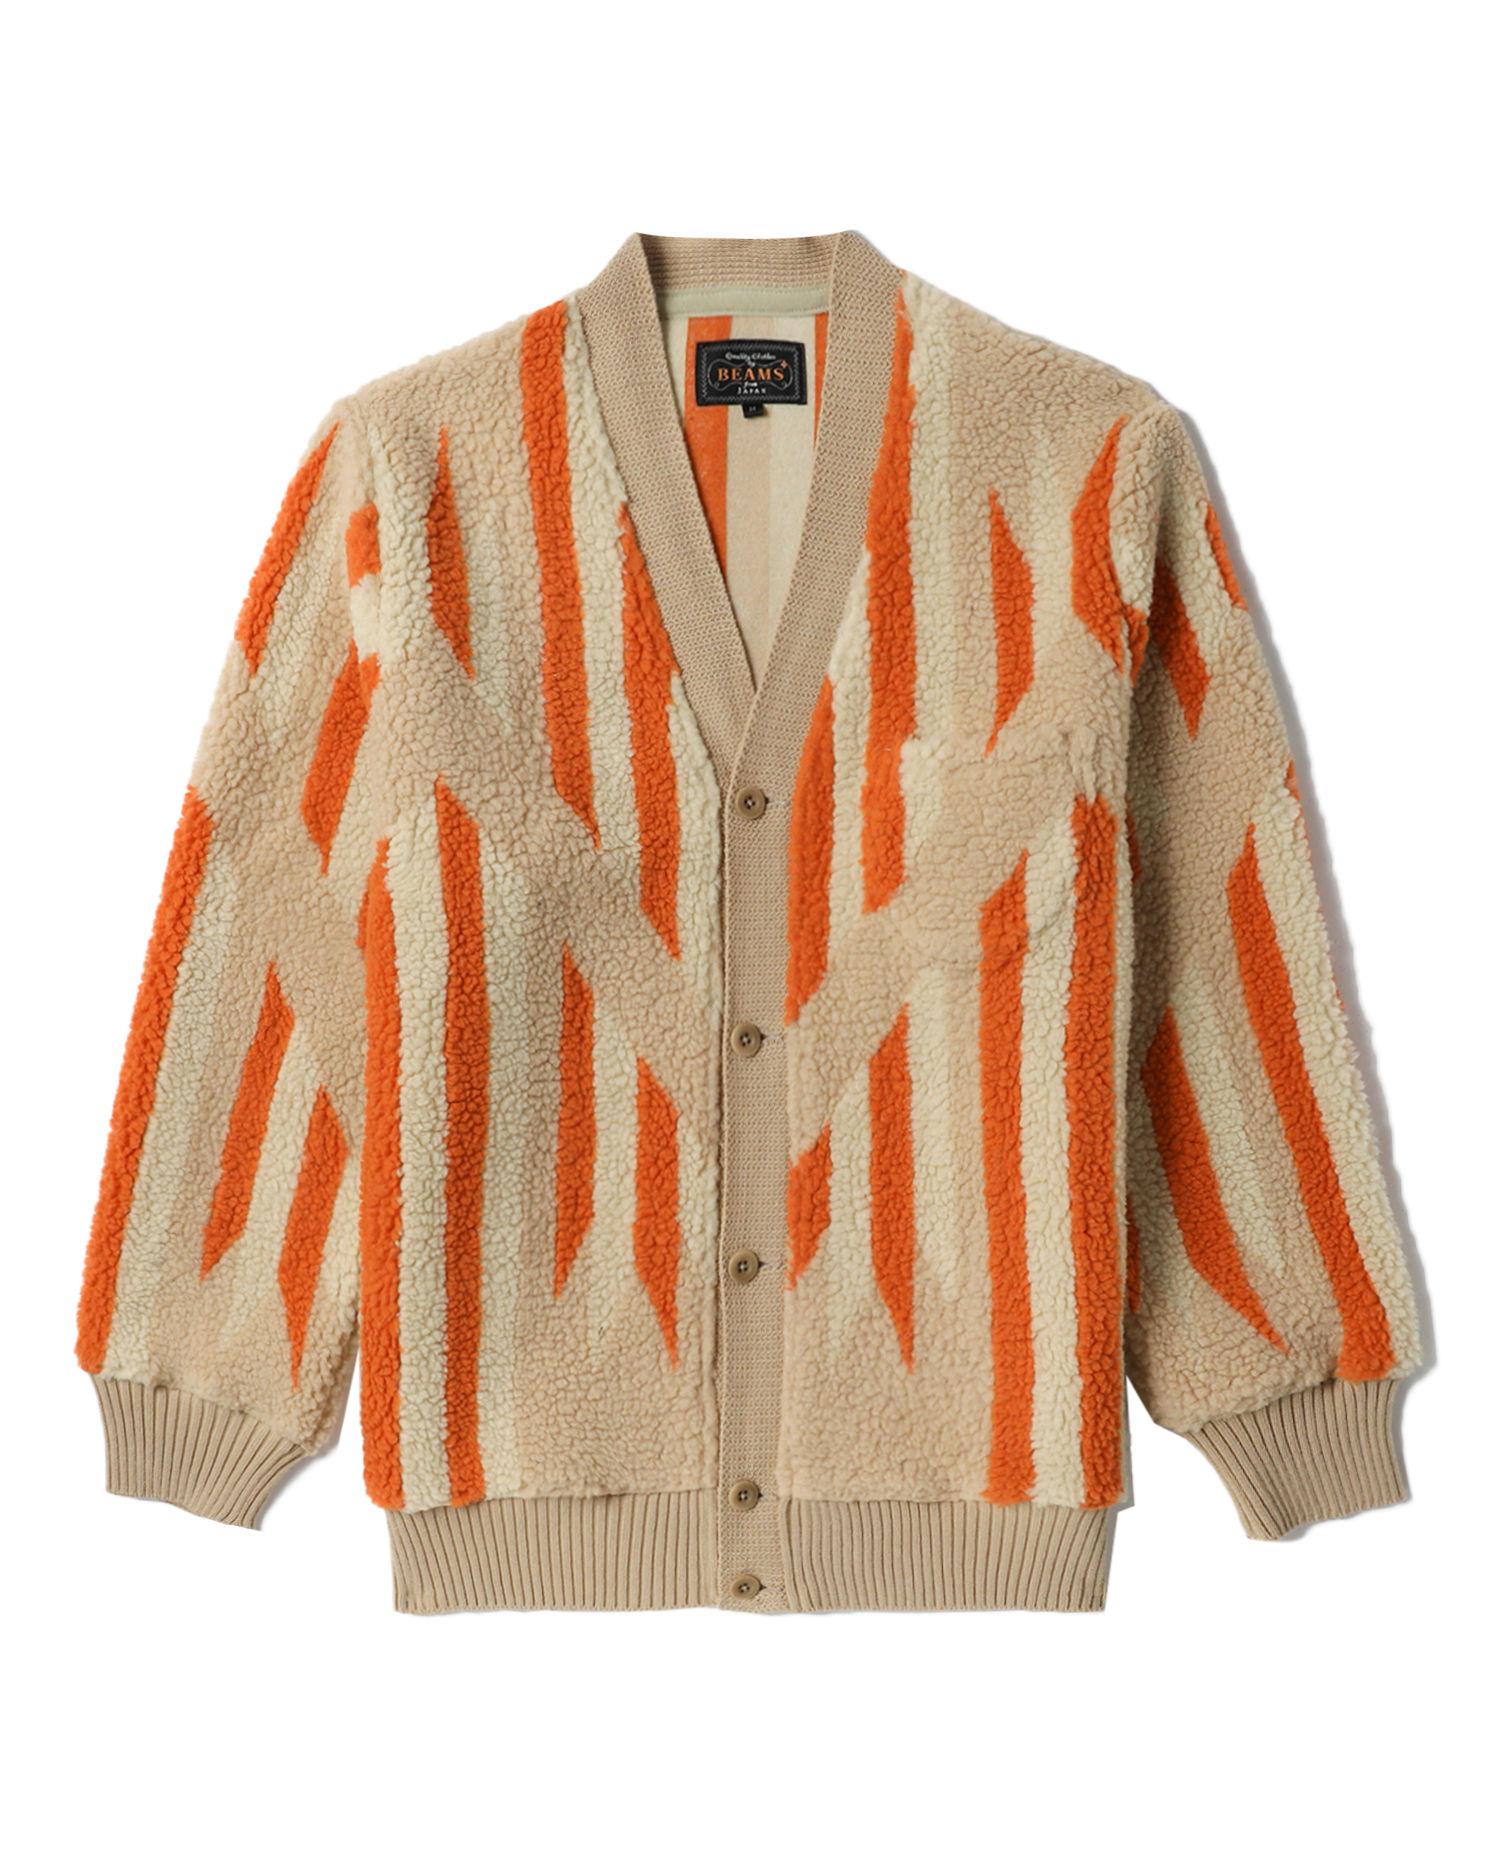 Striped fleece relaxed cardigan by BEAMS PLUS